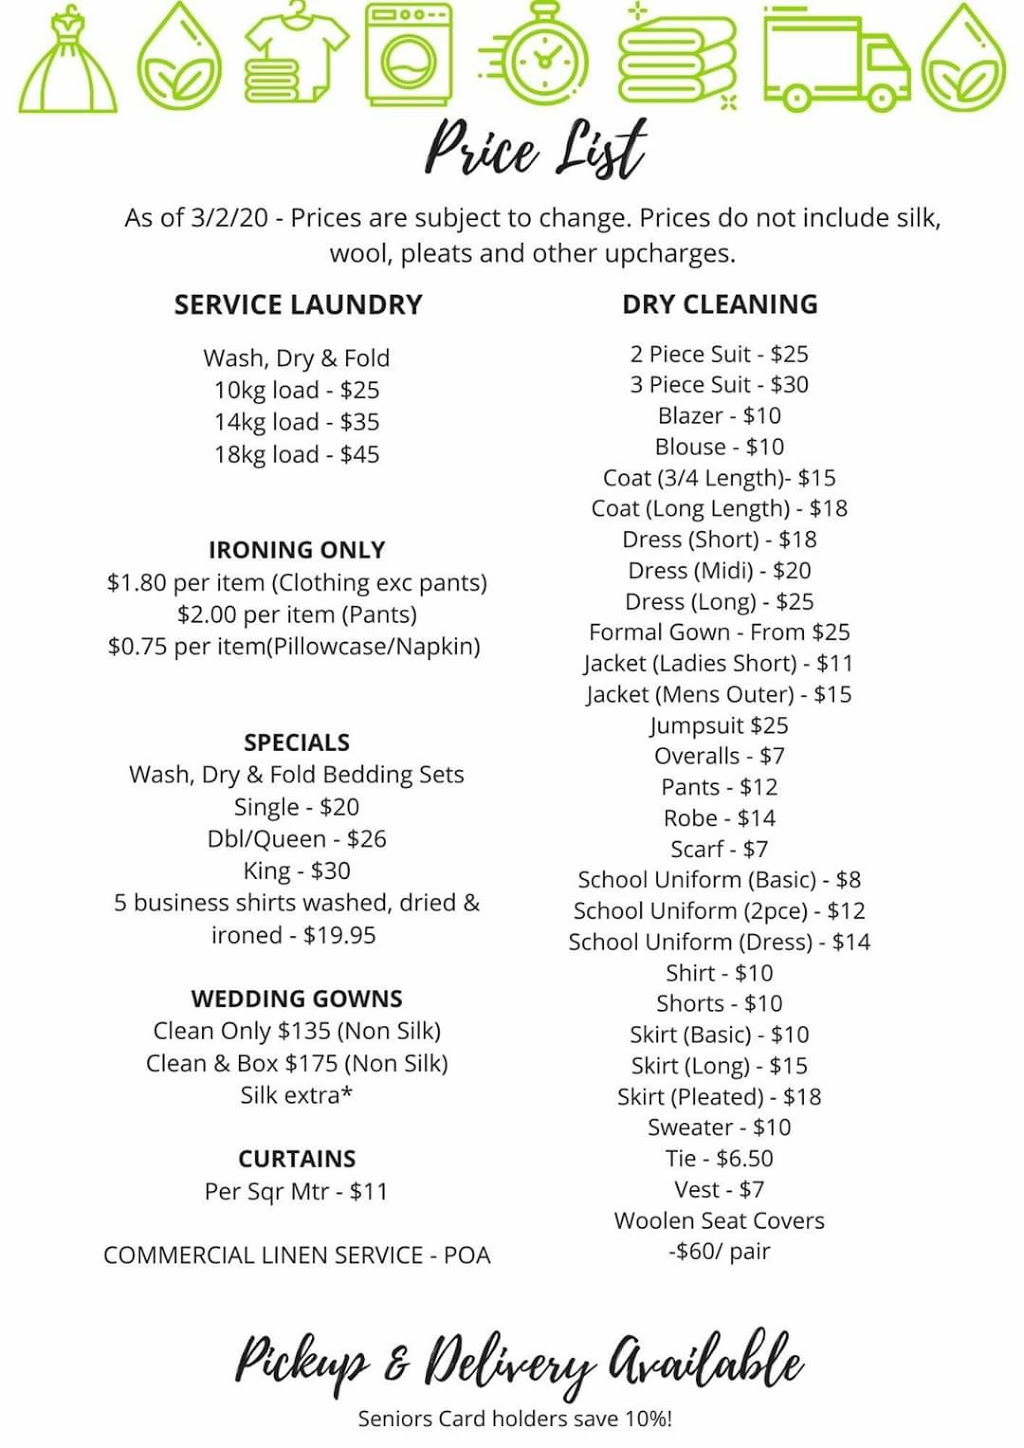 Ezy & Green Dry Cleaning | Shop 3/36 Adelaide Rd, Gawler South SA 5118, Australia | Phone: (08) 8523 5040